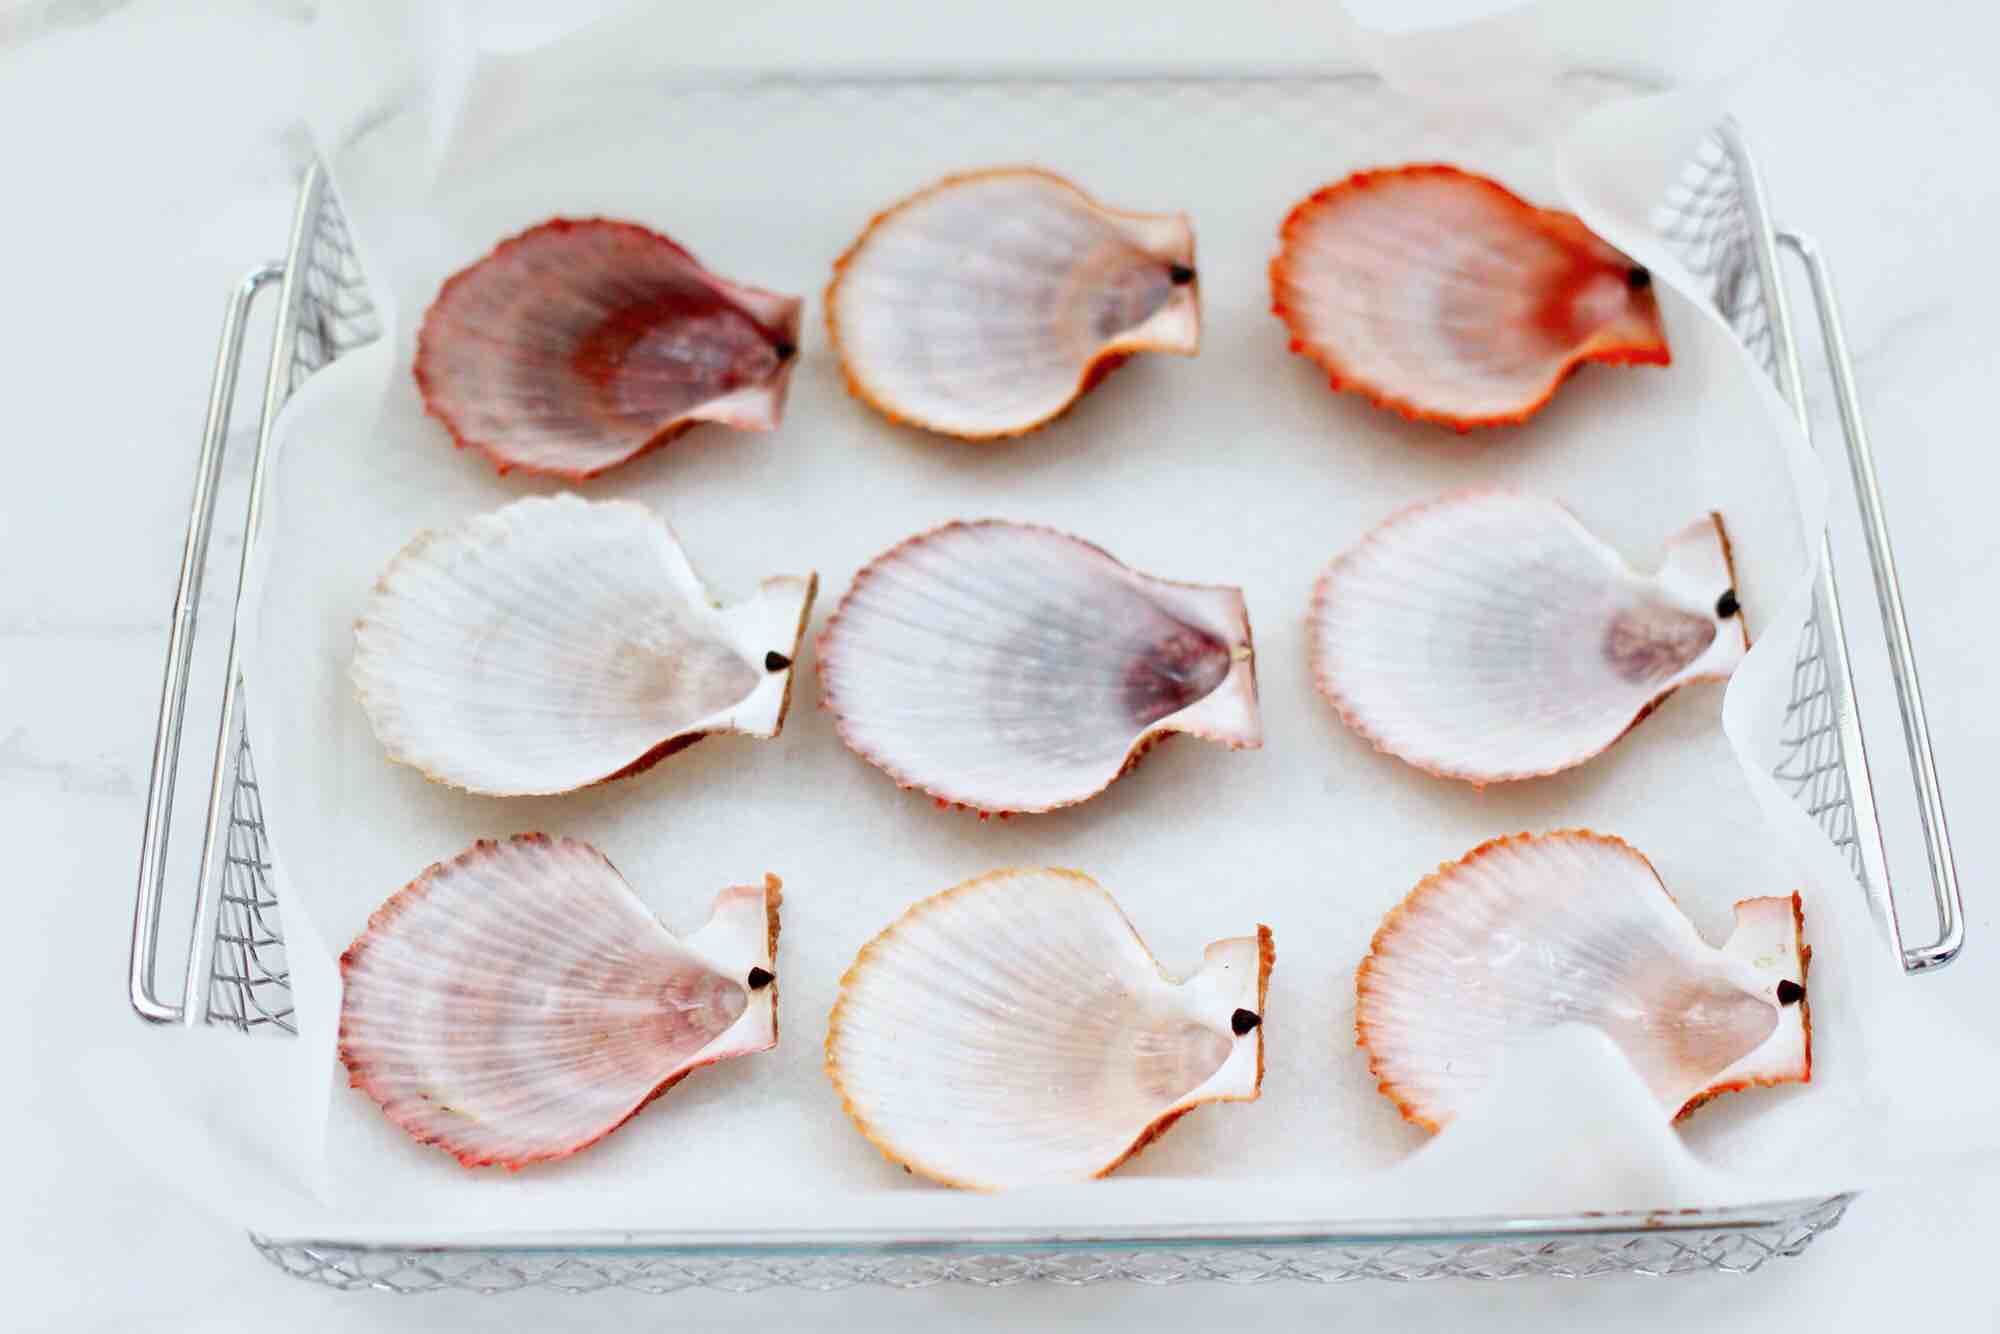 Grilled Scallops with Garlic and Chopped Pepper recipe